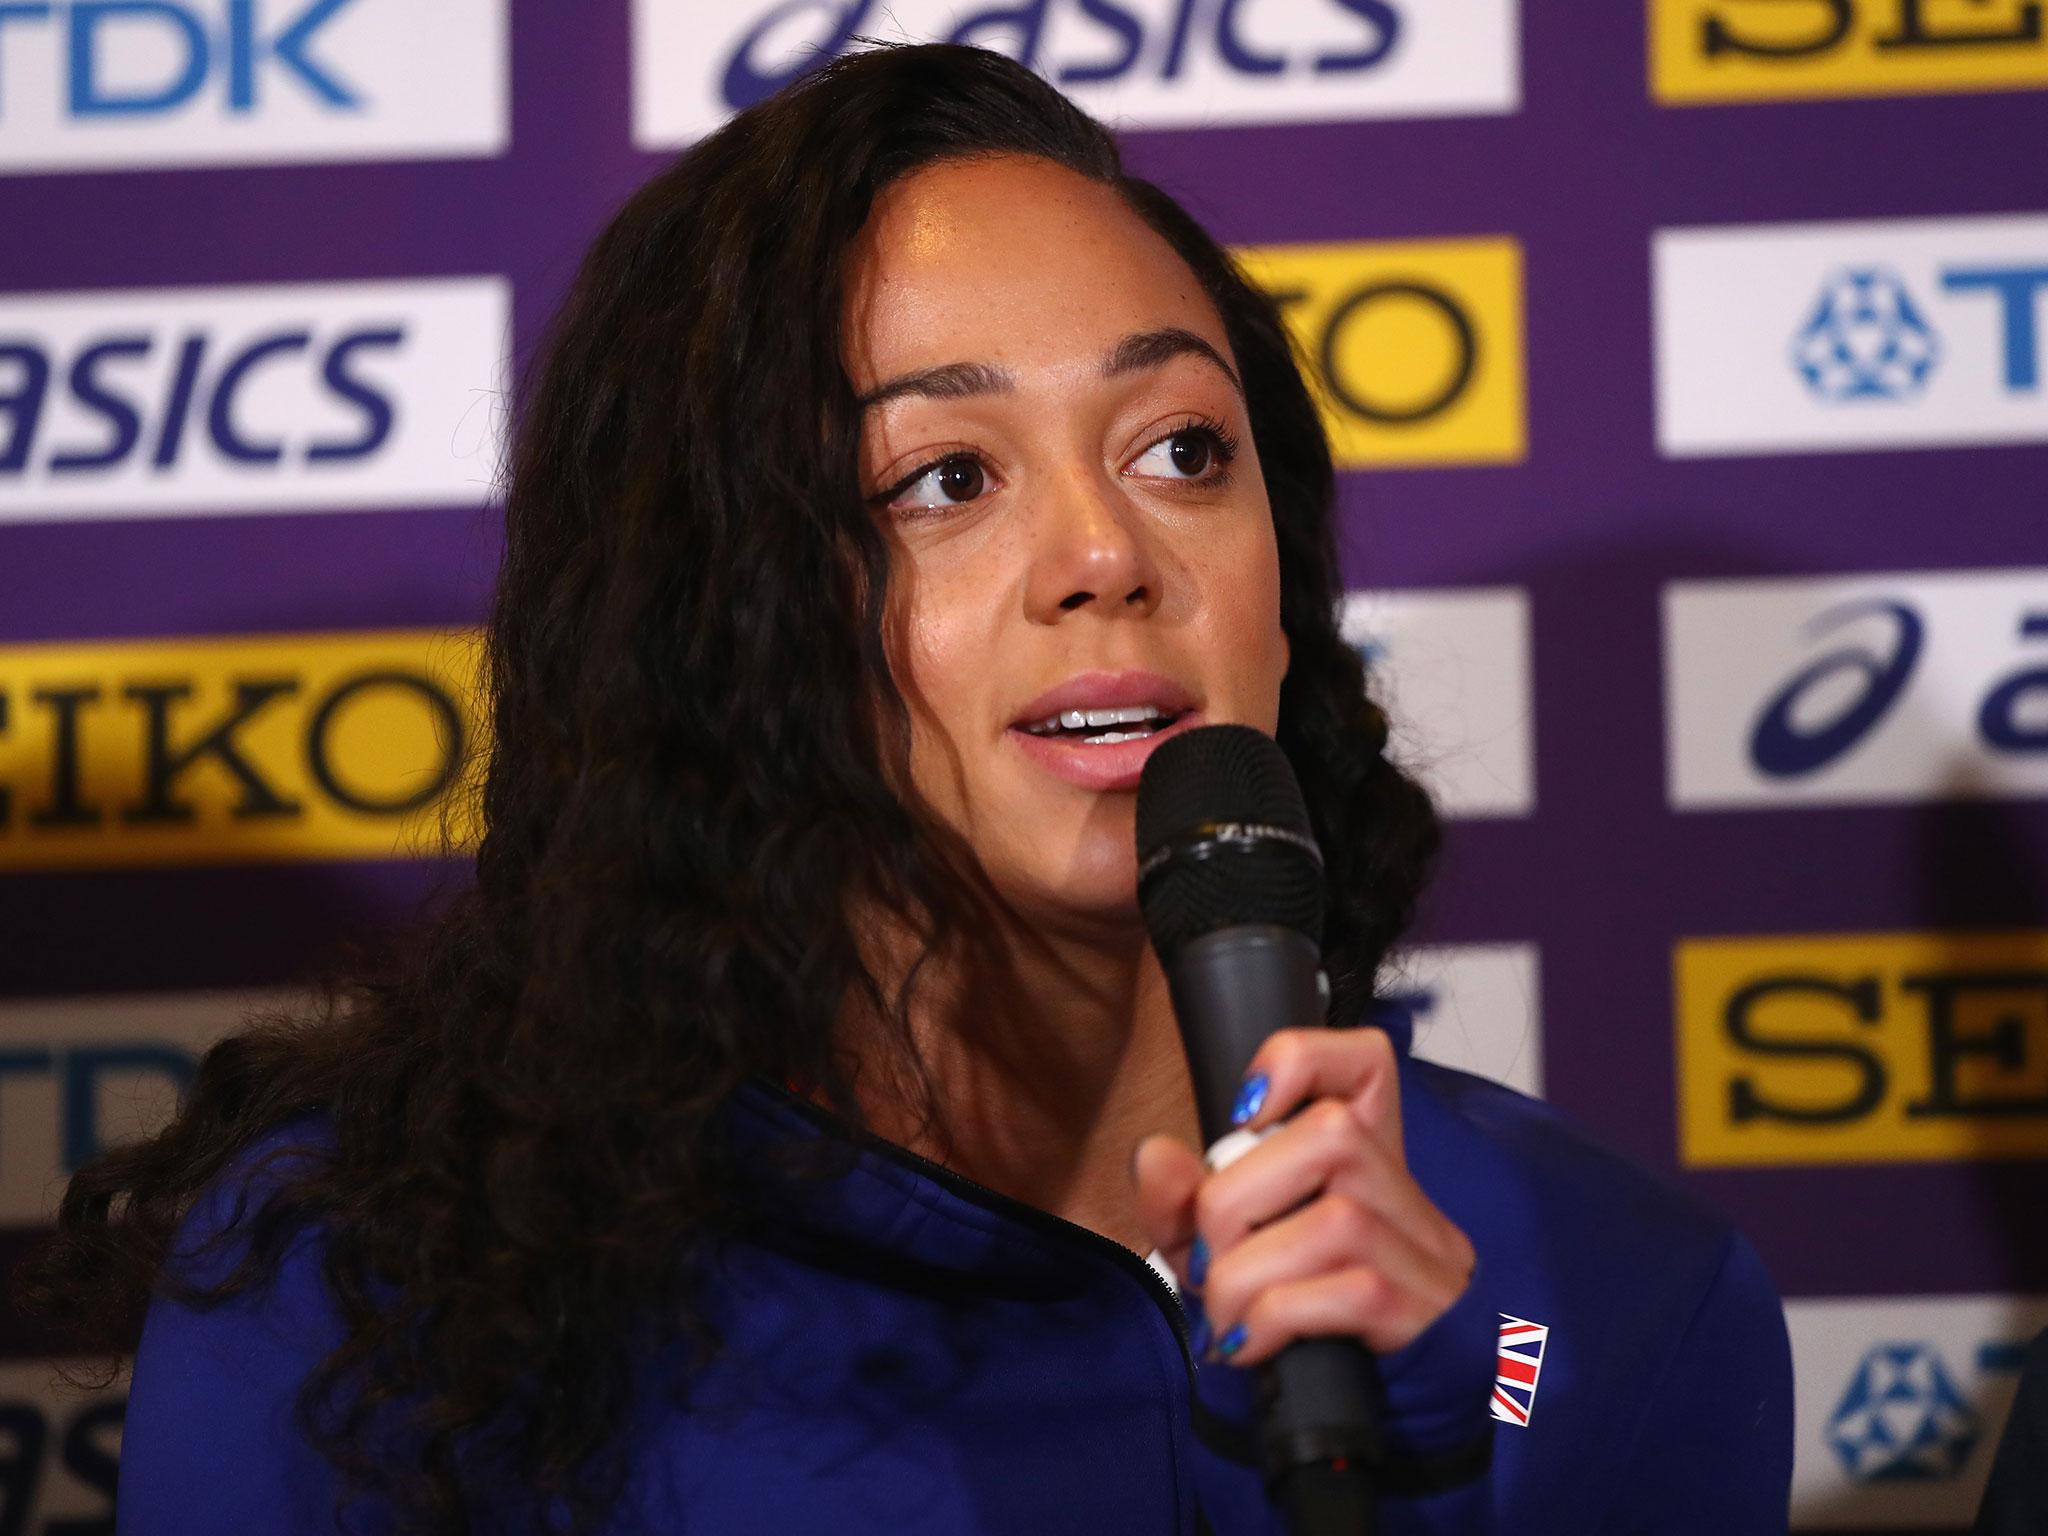 Katarina Johnson-Thompson has insisted victory is not assured